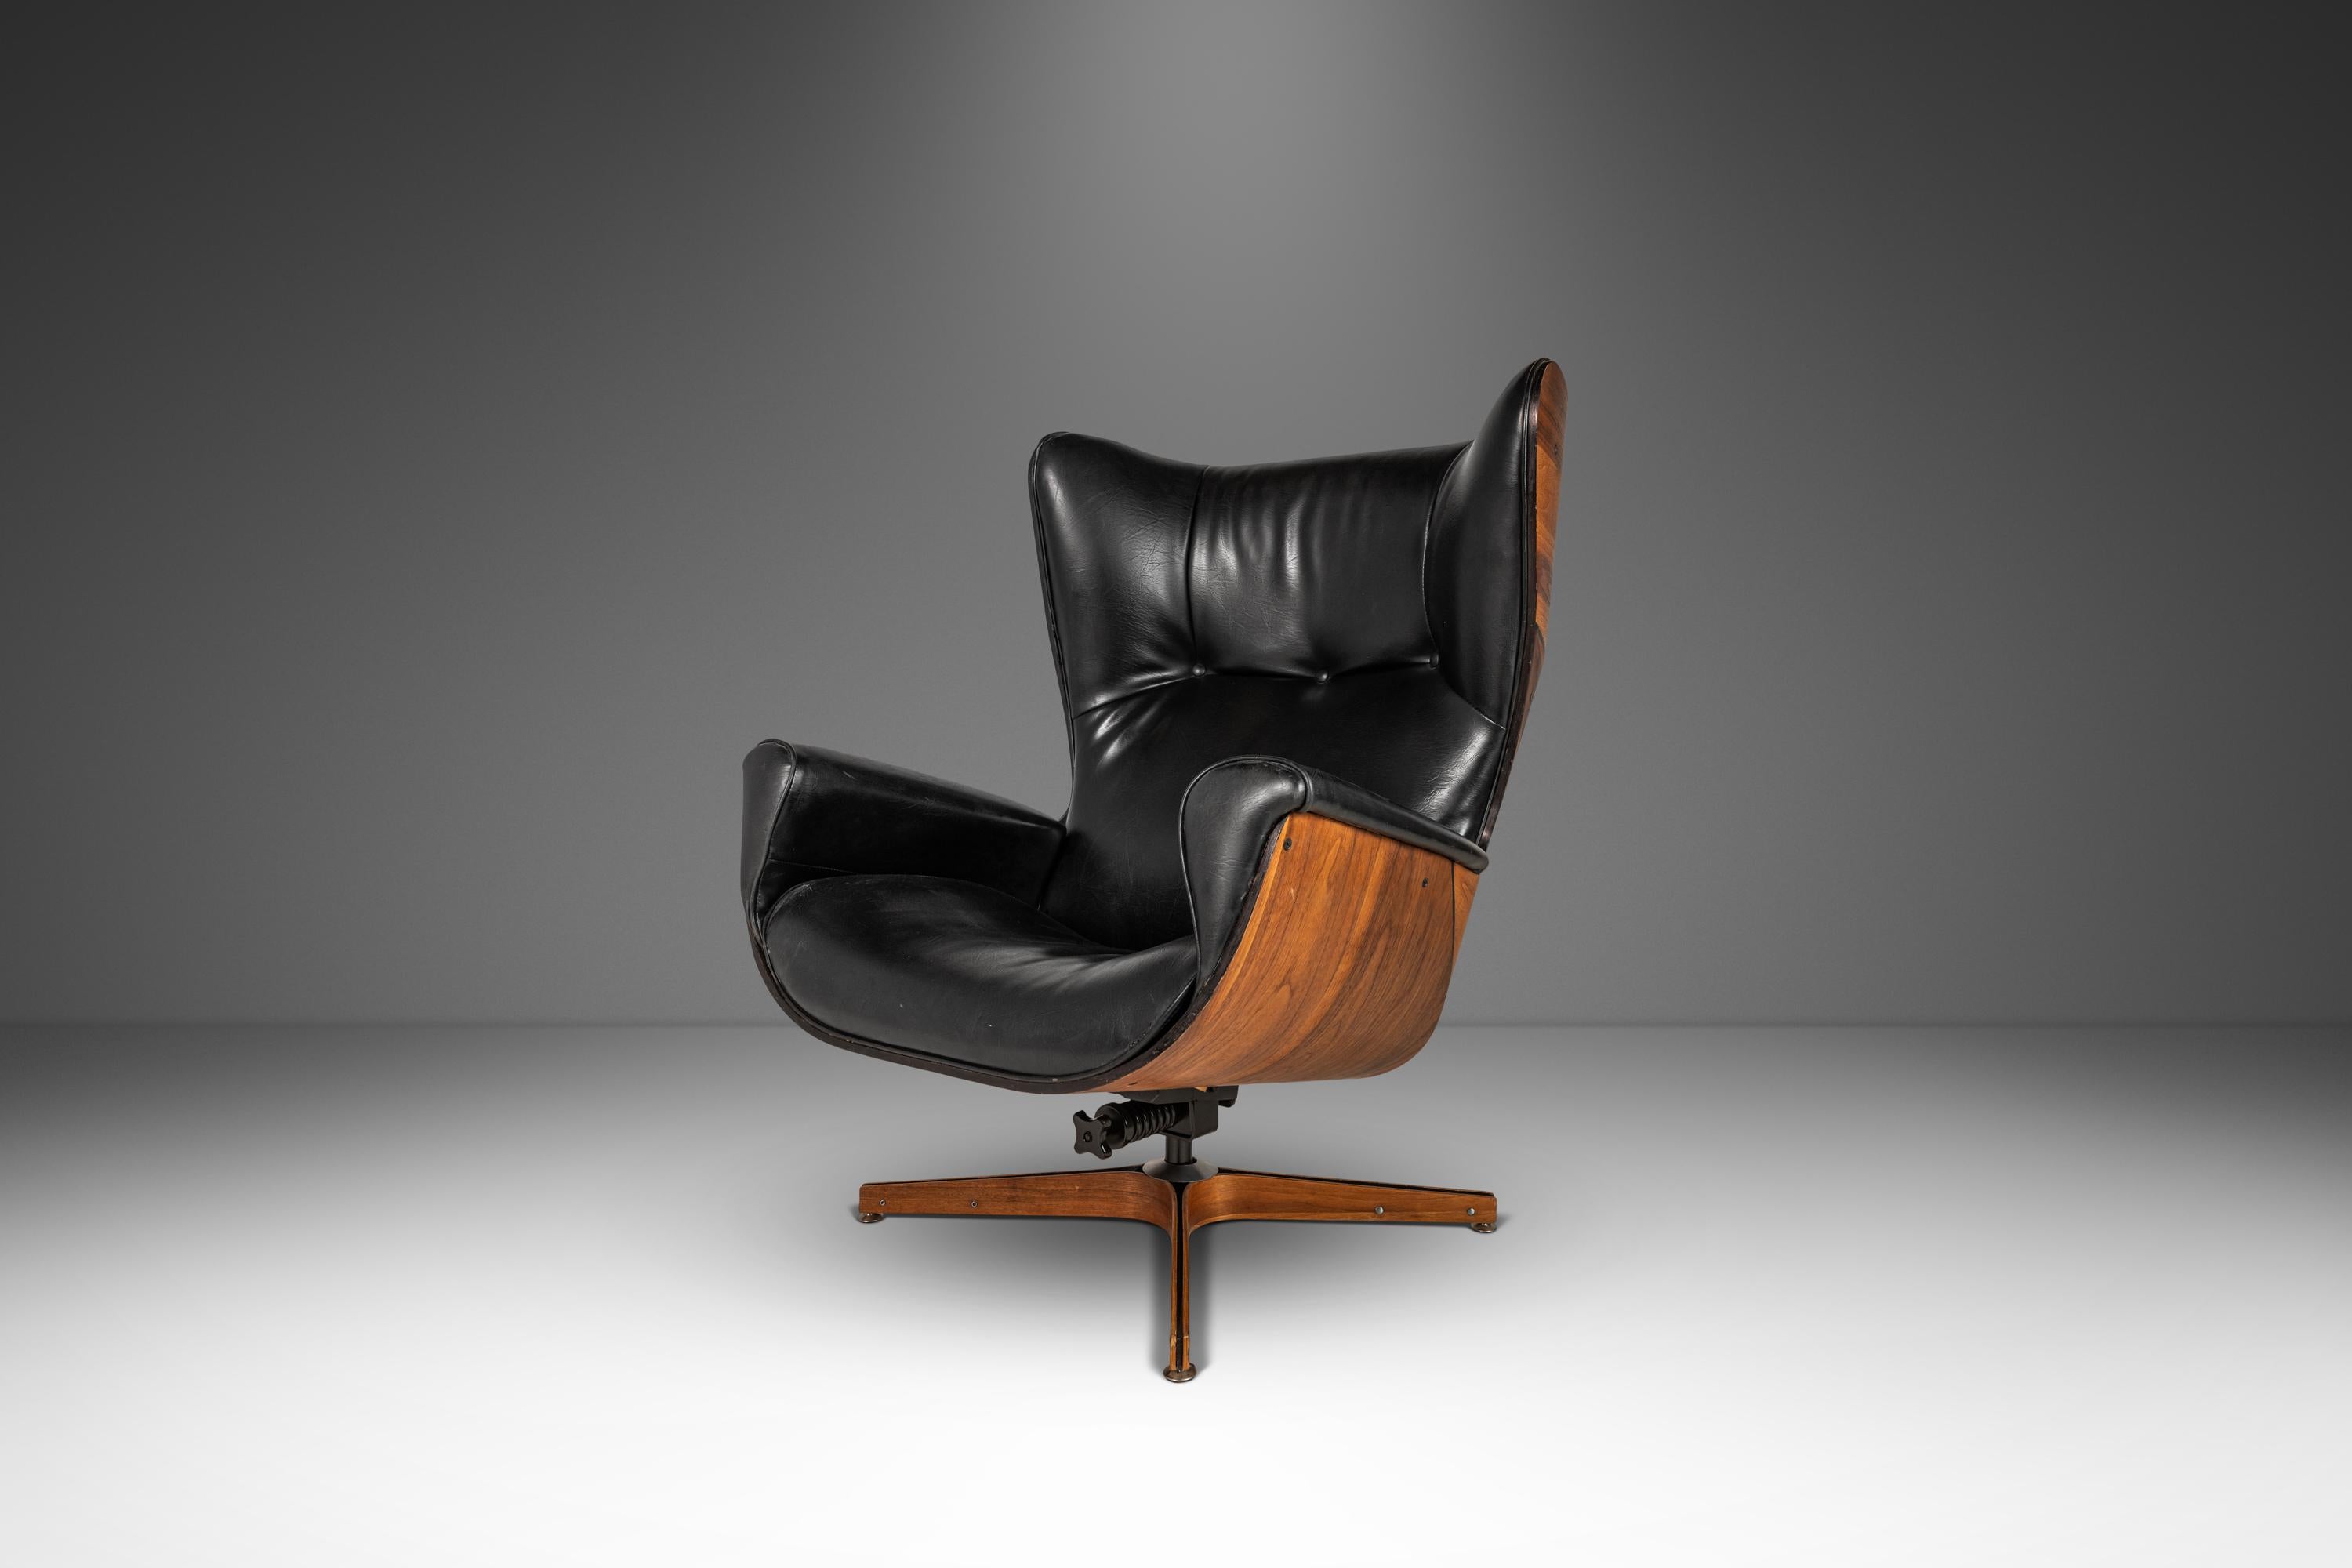 Attention collectors! Equal parts comfort and style this iconic wingback Mr. Chair, designed by the acclaimed George Mulhauser, is the epitome of functional art. In 100% original, vintage condition this ground-breaking model is practically as good